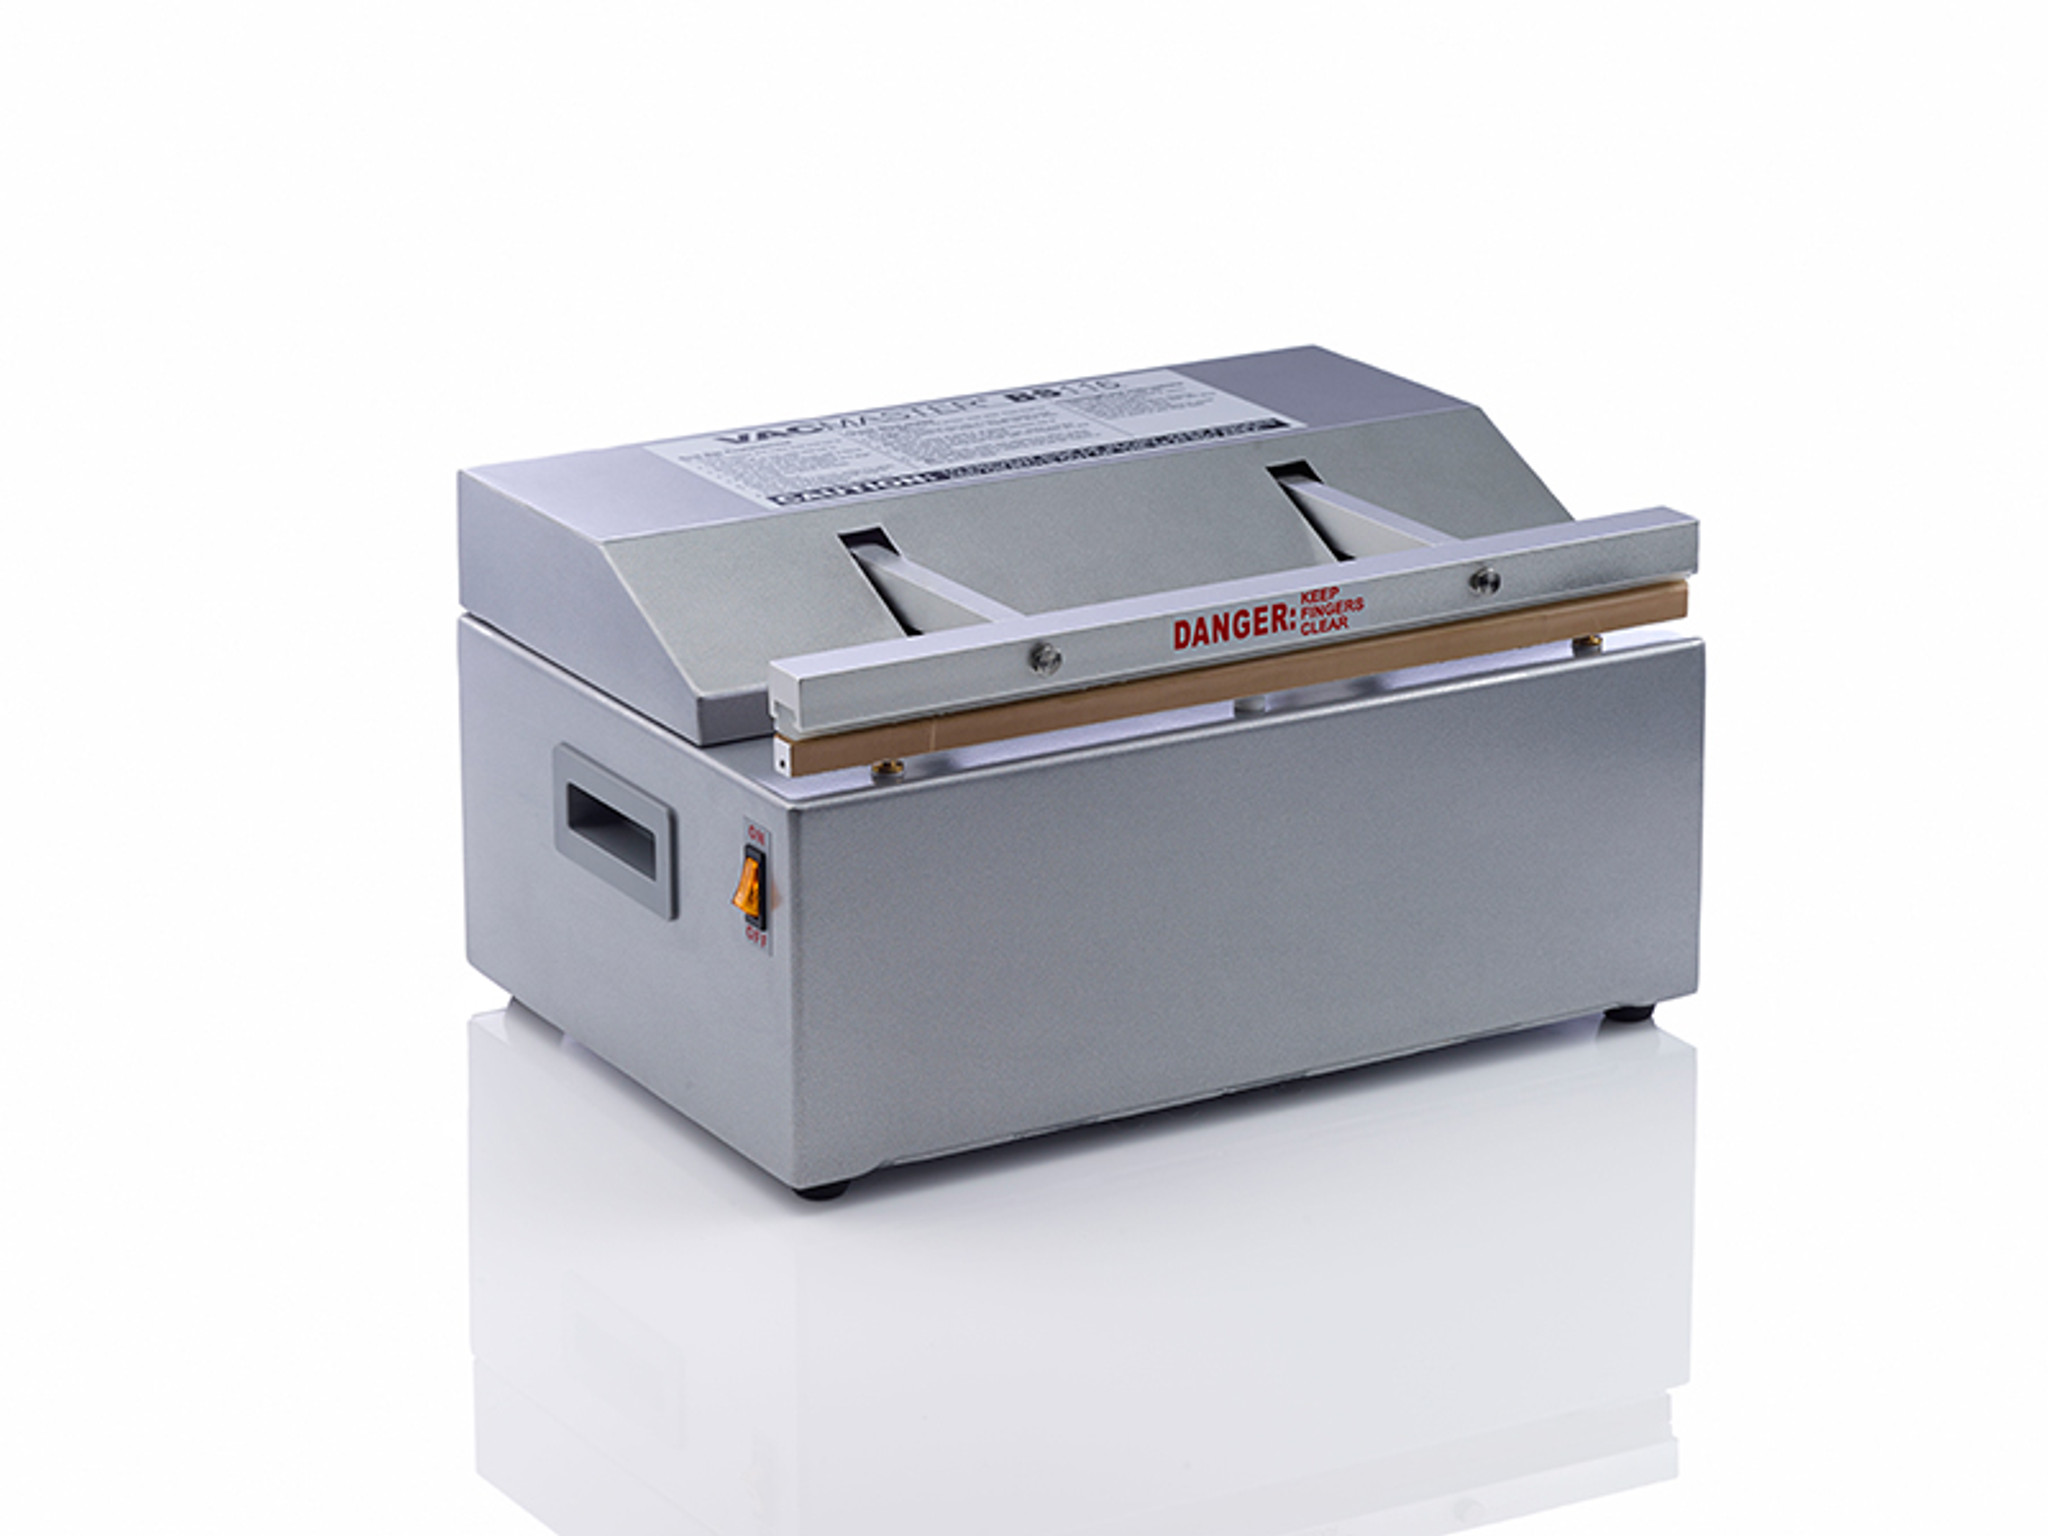 Vacuum Sealing Machine with Detachable Base Easy to Clean Sealer